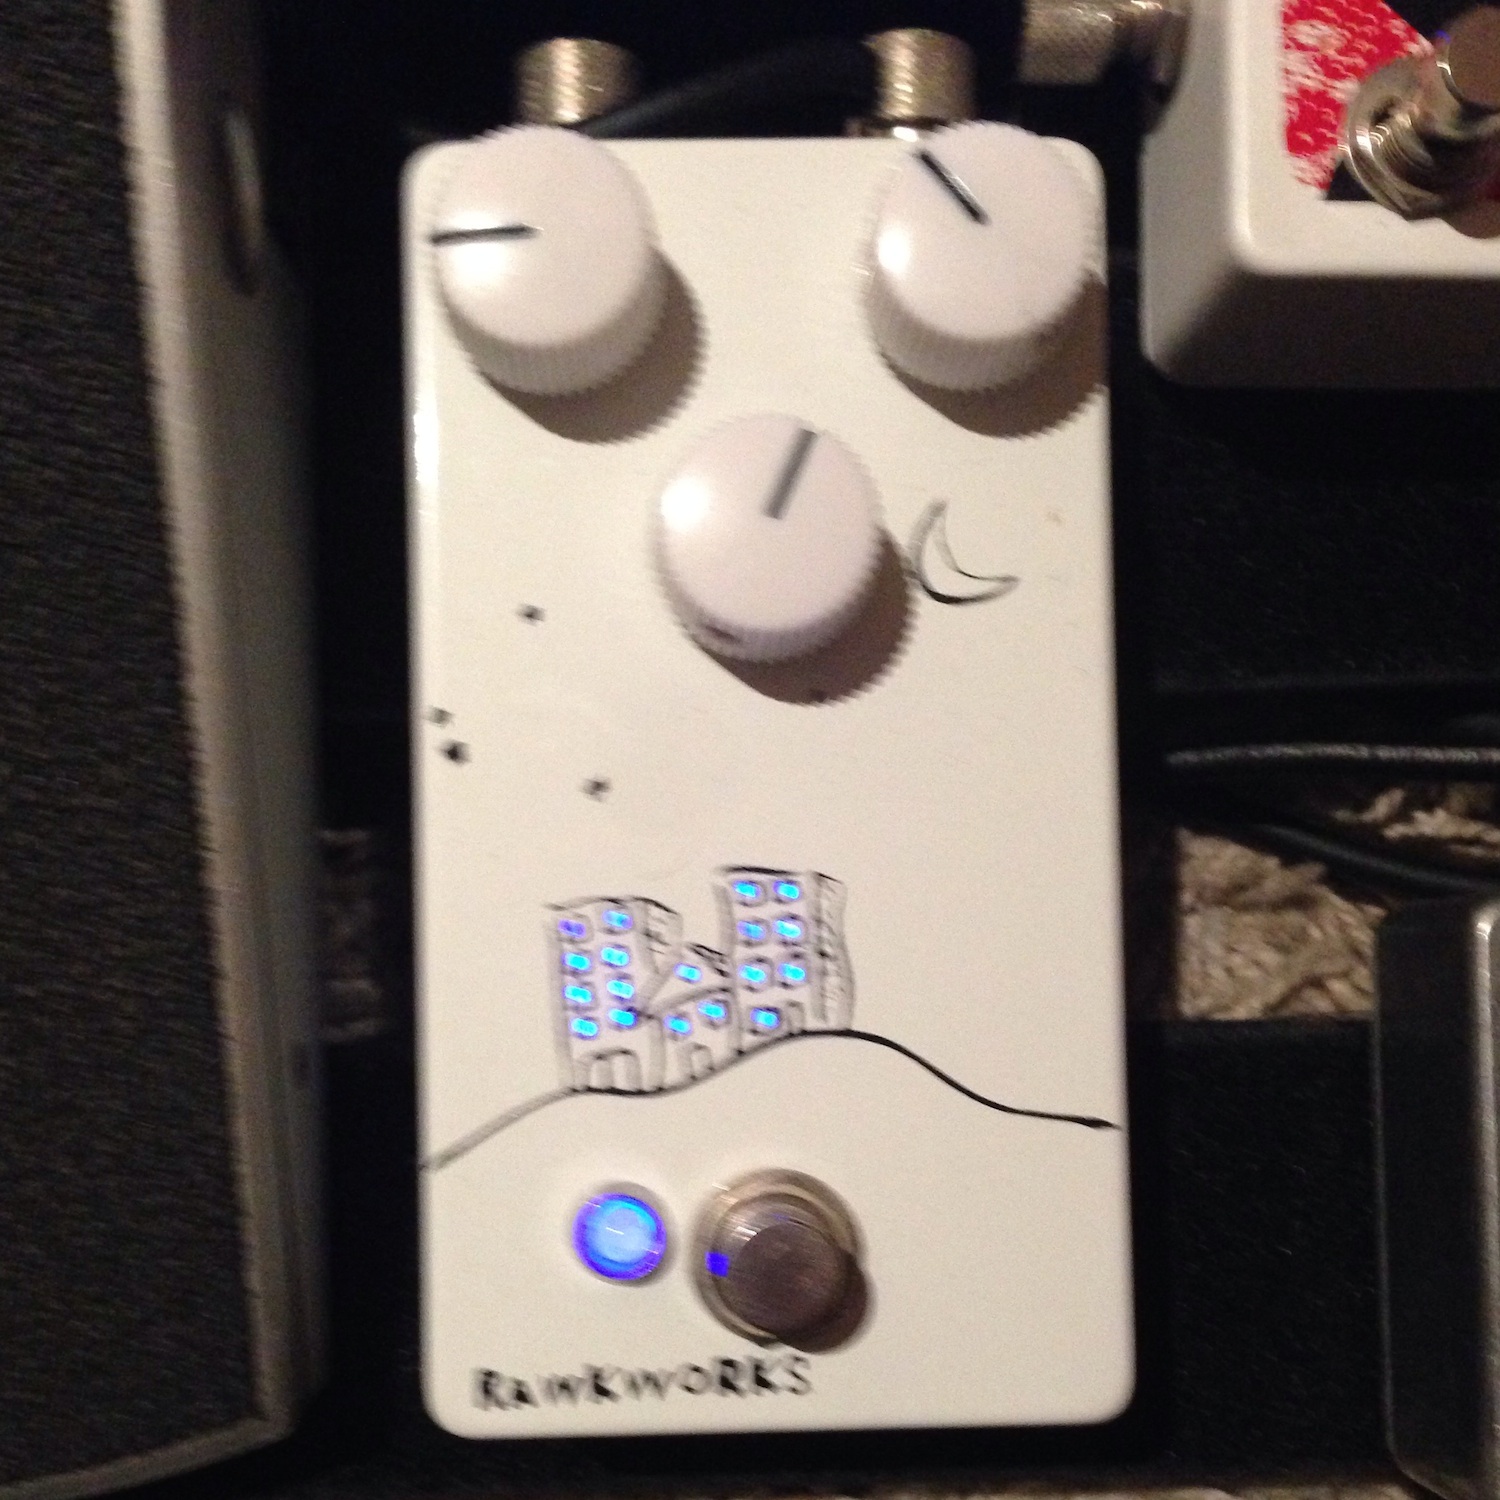 Rawkworks Archives - Pedal of the Day